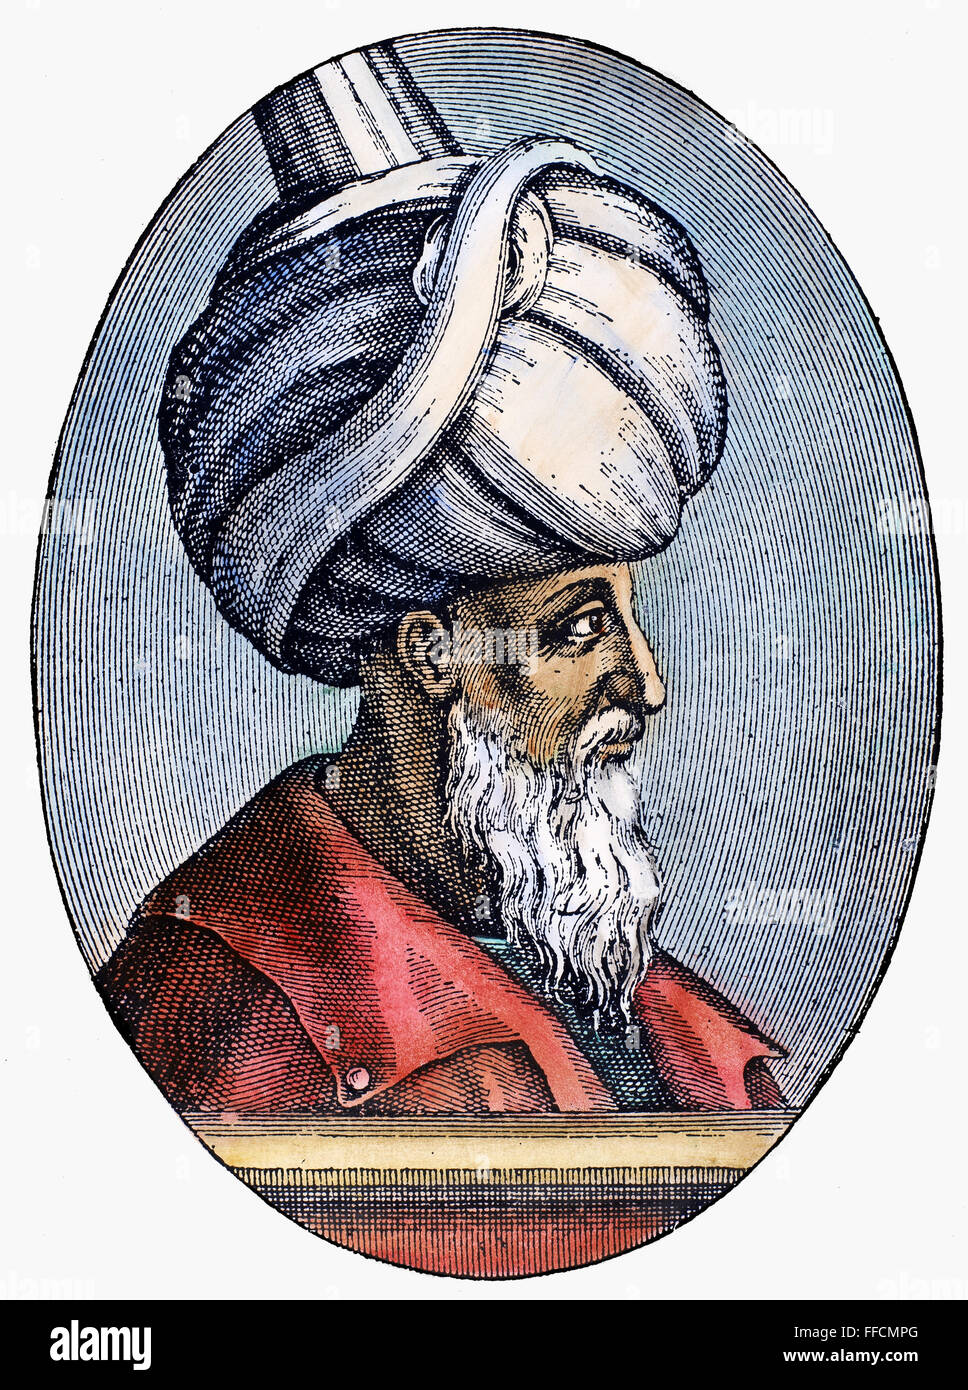 SULEIMAN THE MAGNIFICENT /n(c1494-1566). Sultan of the Ottoman Empire, 1520-1566. Line engraving, 16th century. Stock Photo